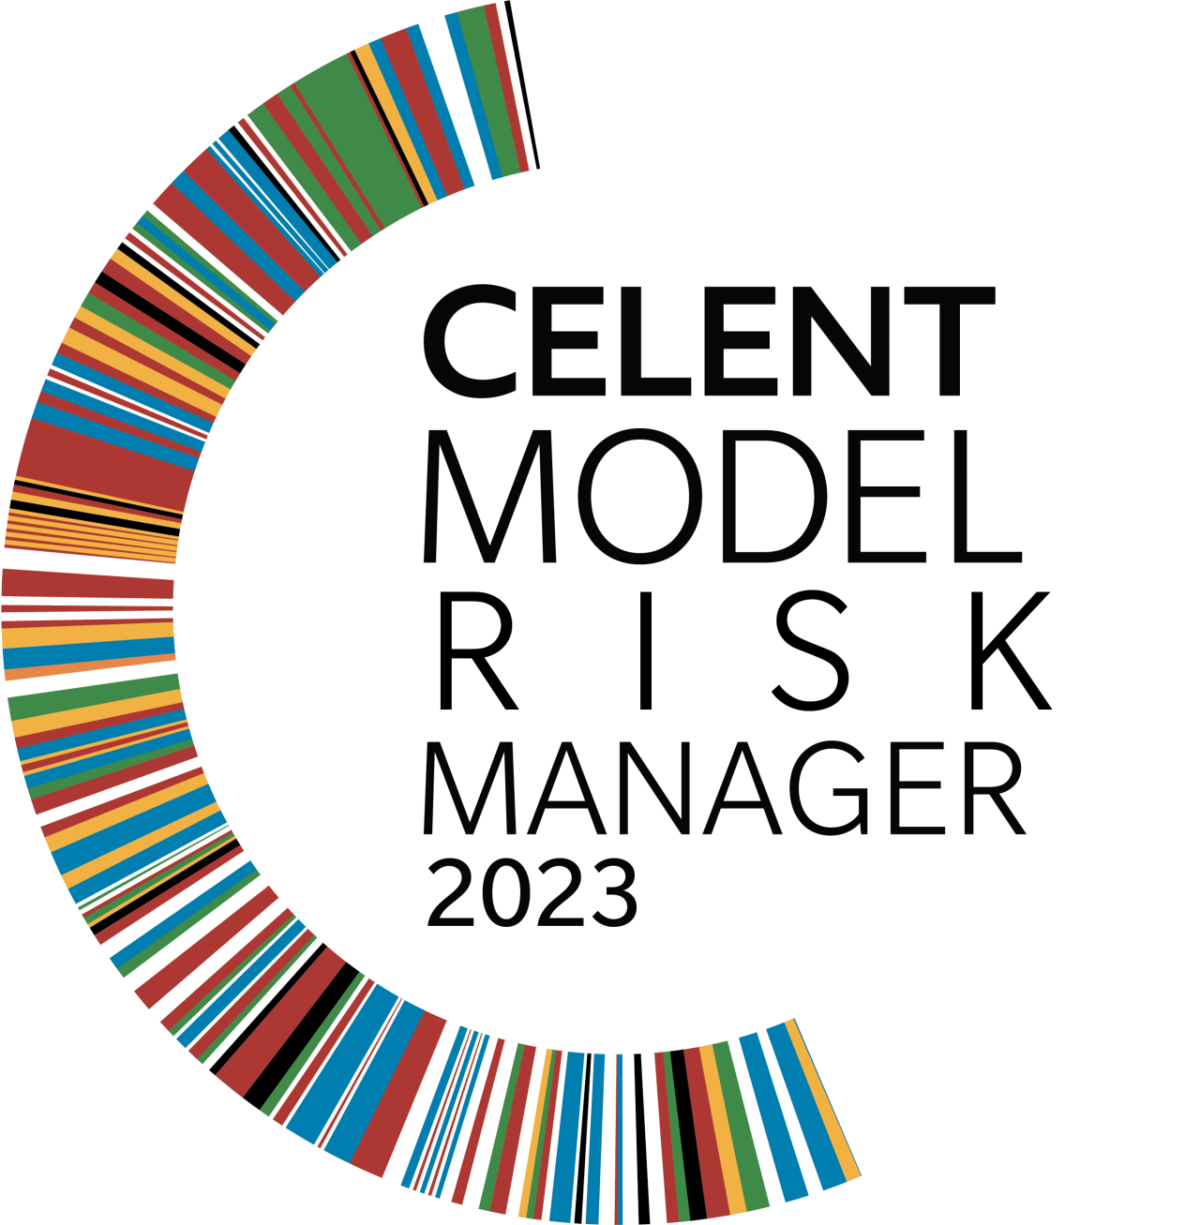 "Celent model risk manager 2023" and logo of many colored stripes in a C formation.